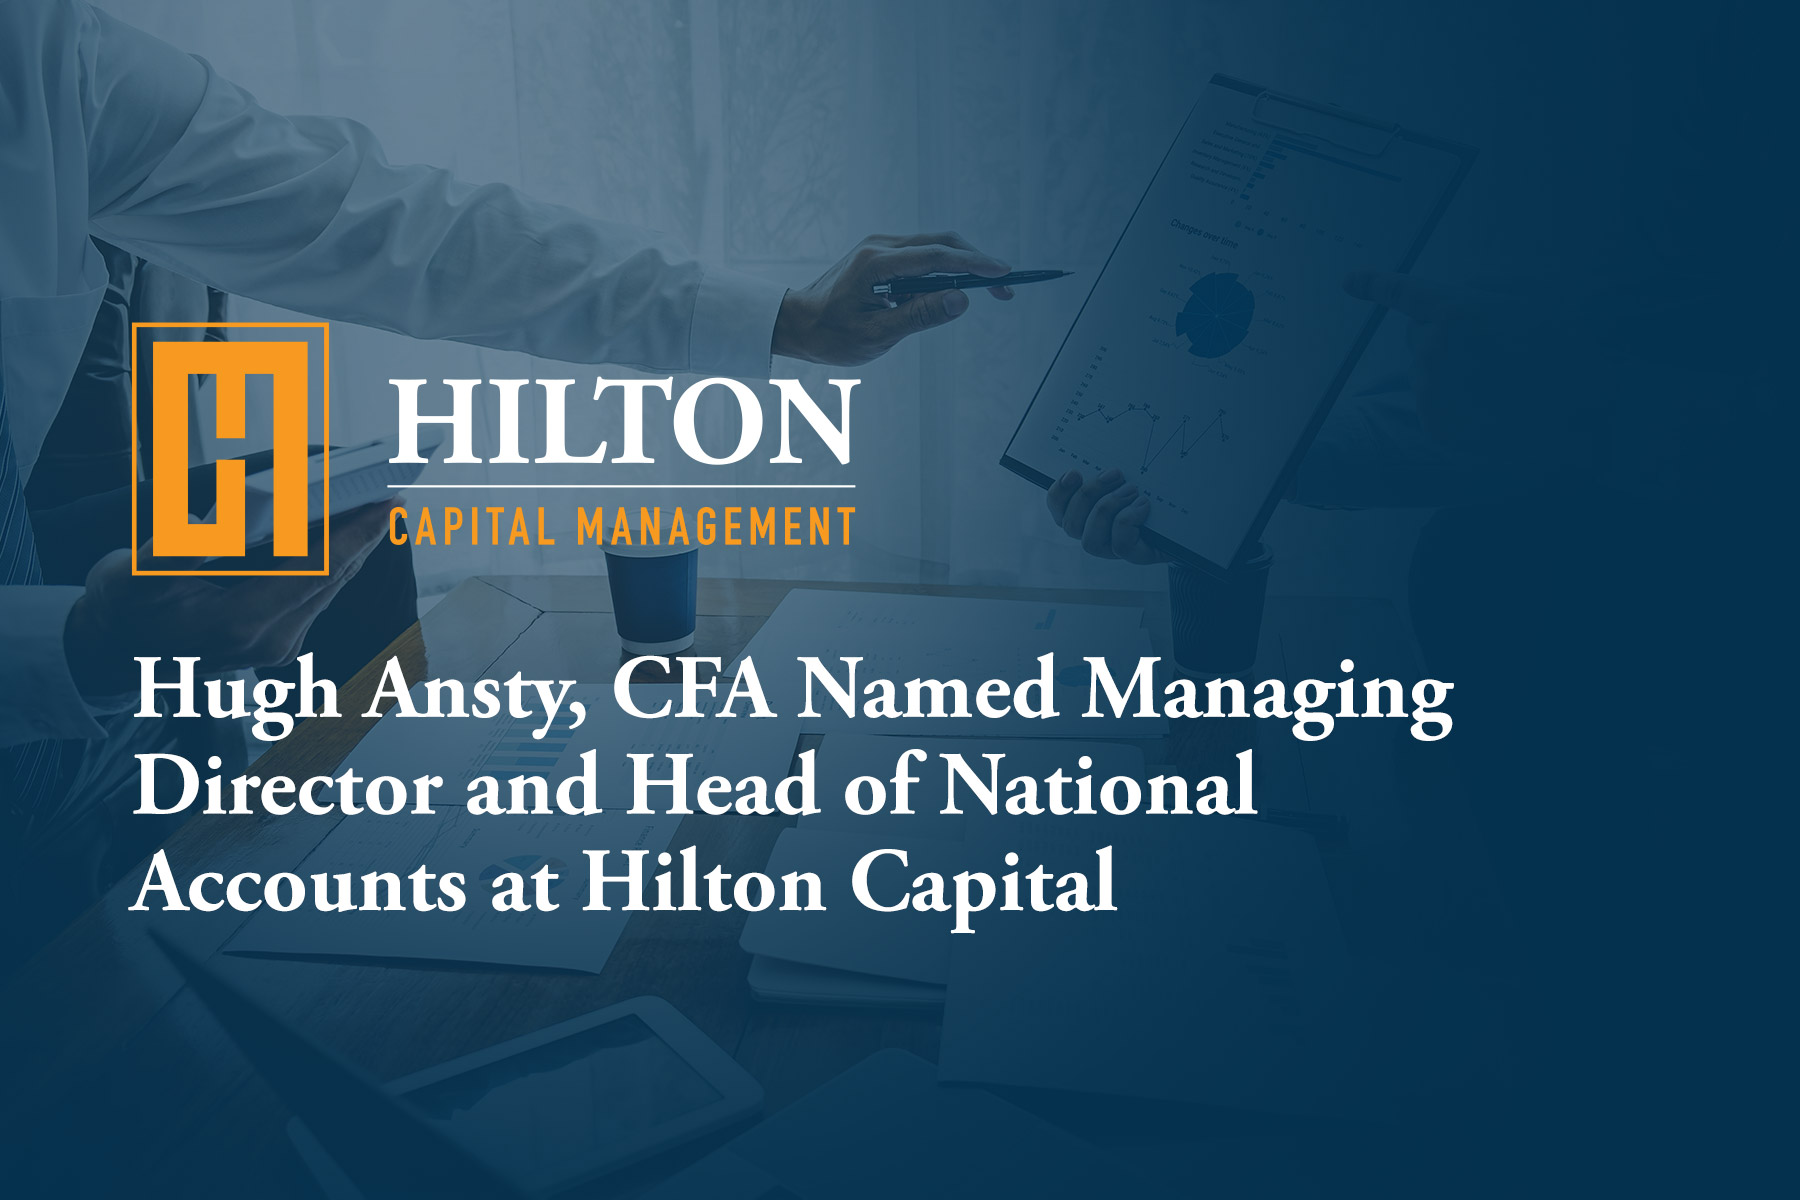 Hugh Ansty, CFA, Named Managing Director and Head of National Accounts at Hilton Capital